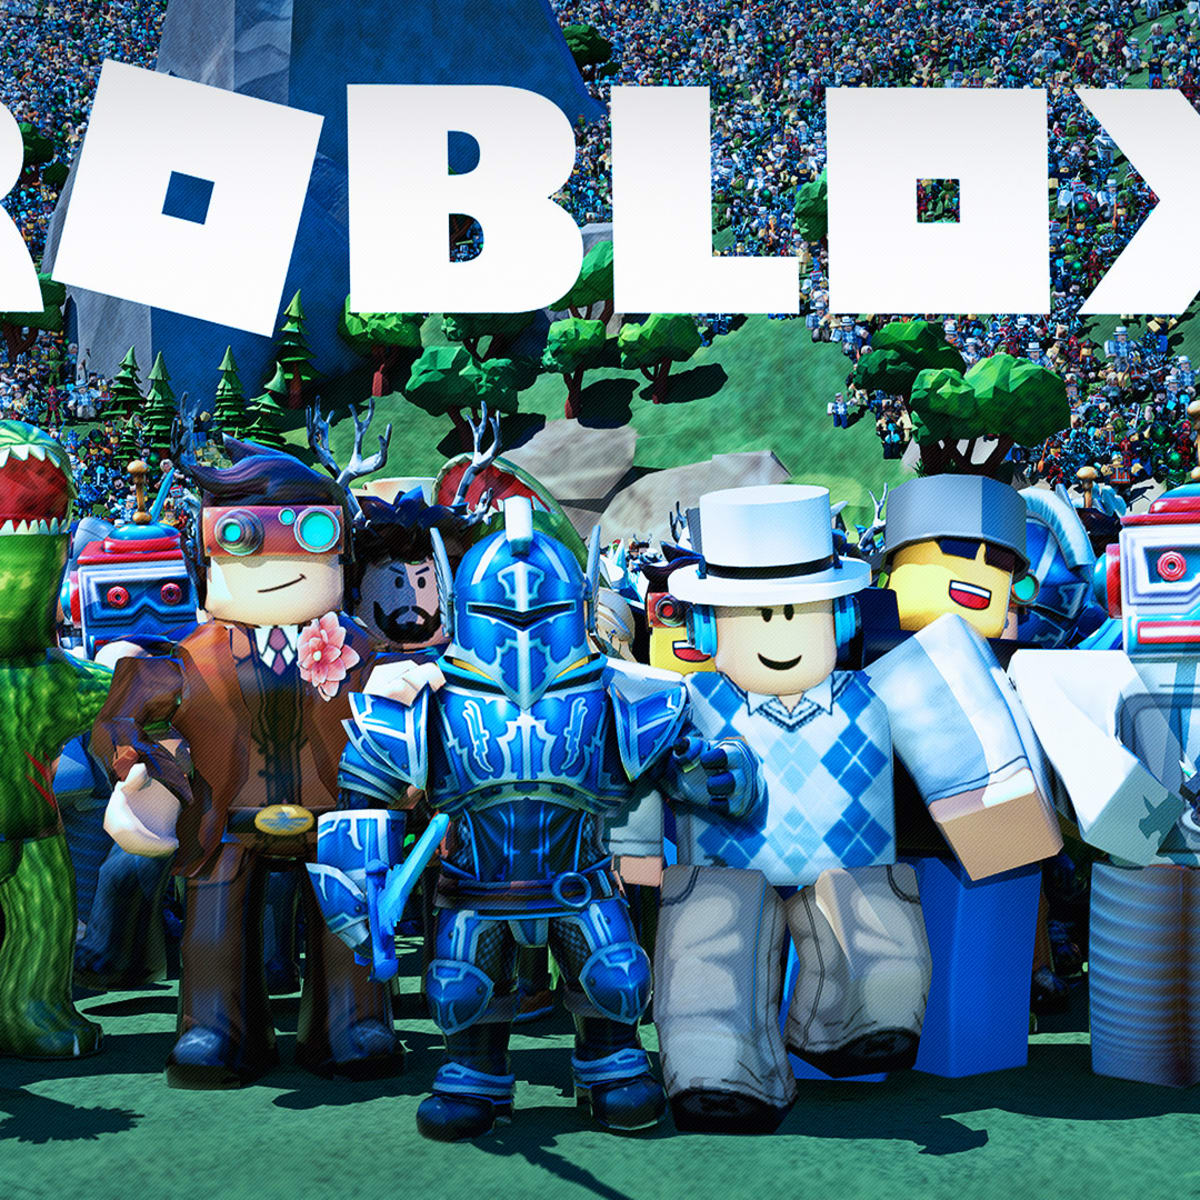 Roblox And Hasbro Higher On Plan For Nerf Monopoly Partnership Thestreet - gee money plays roblox